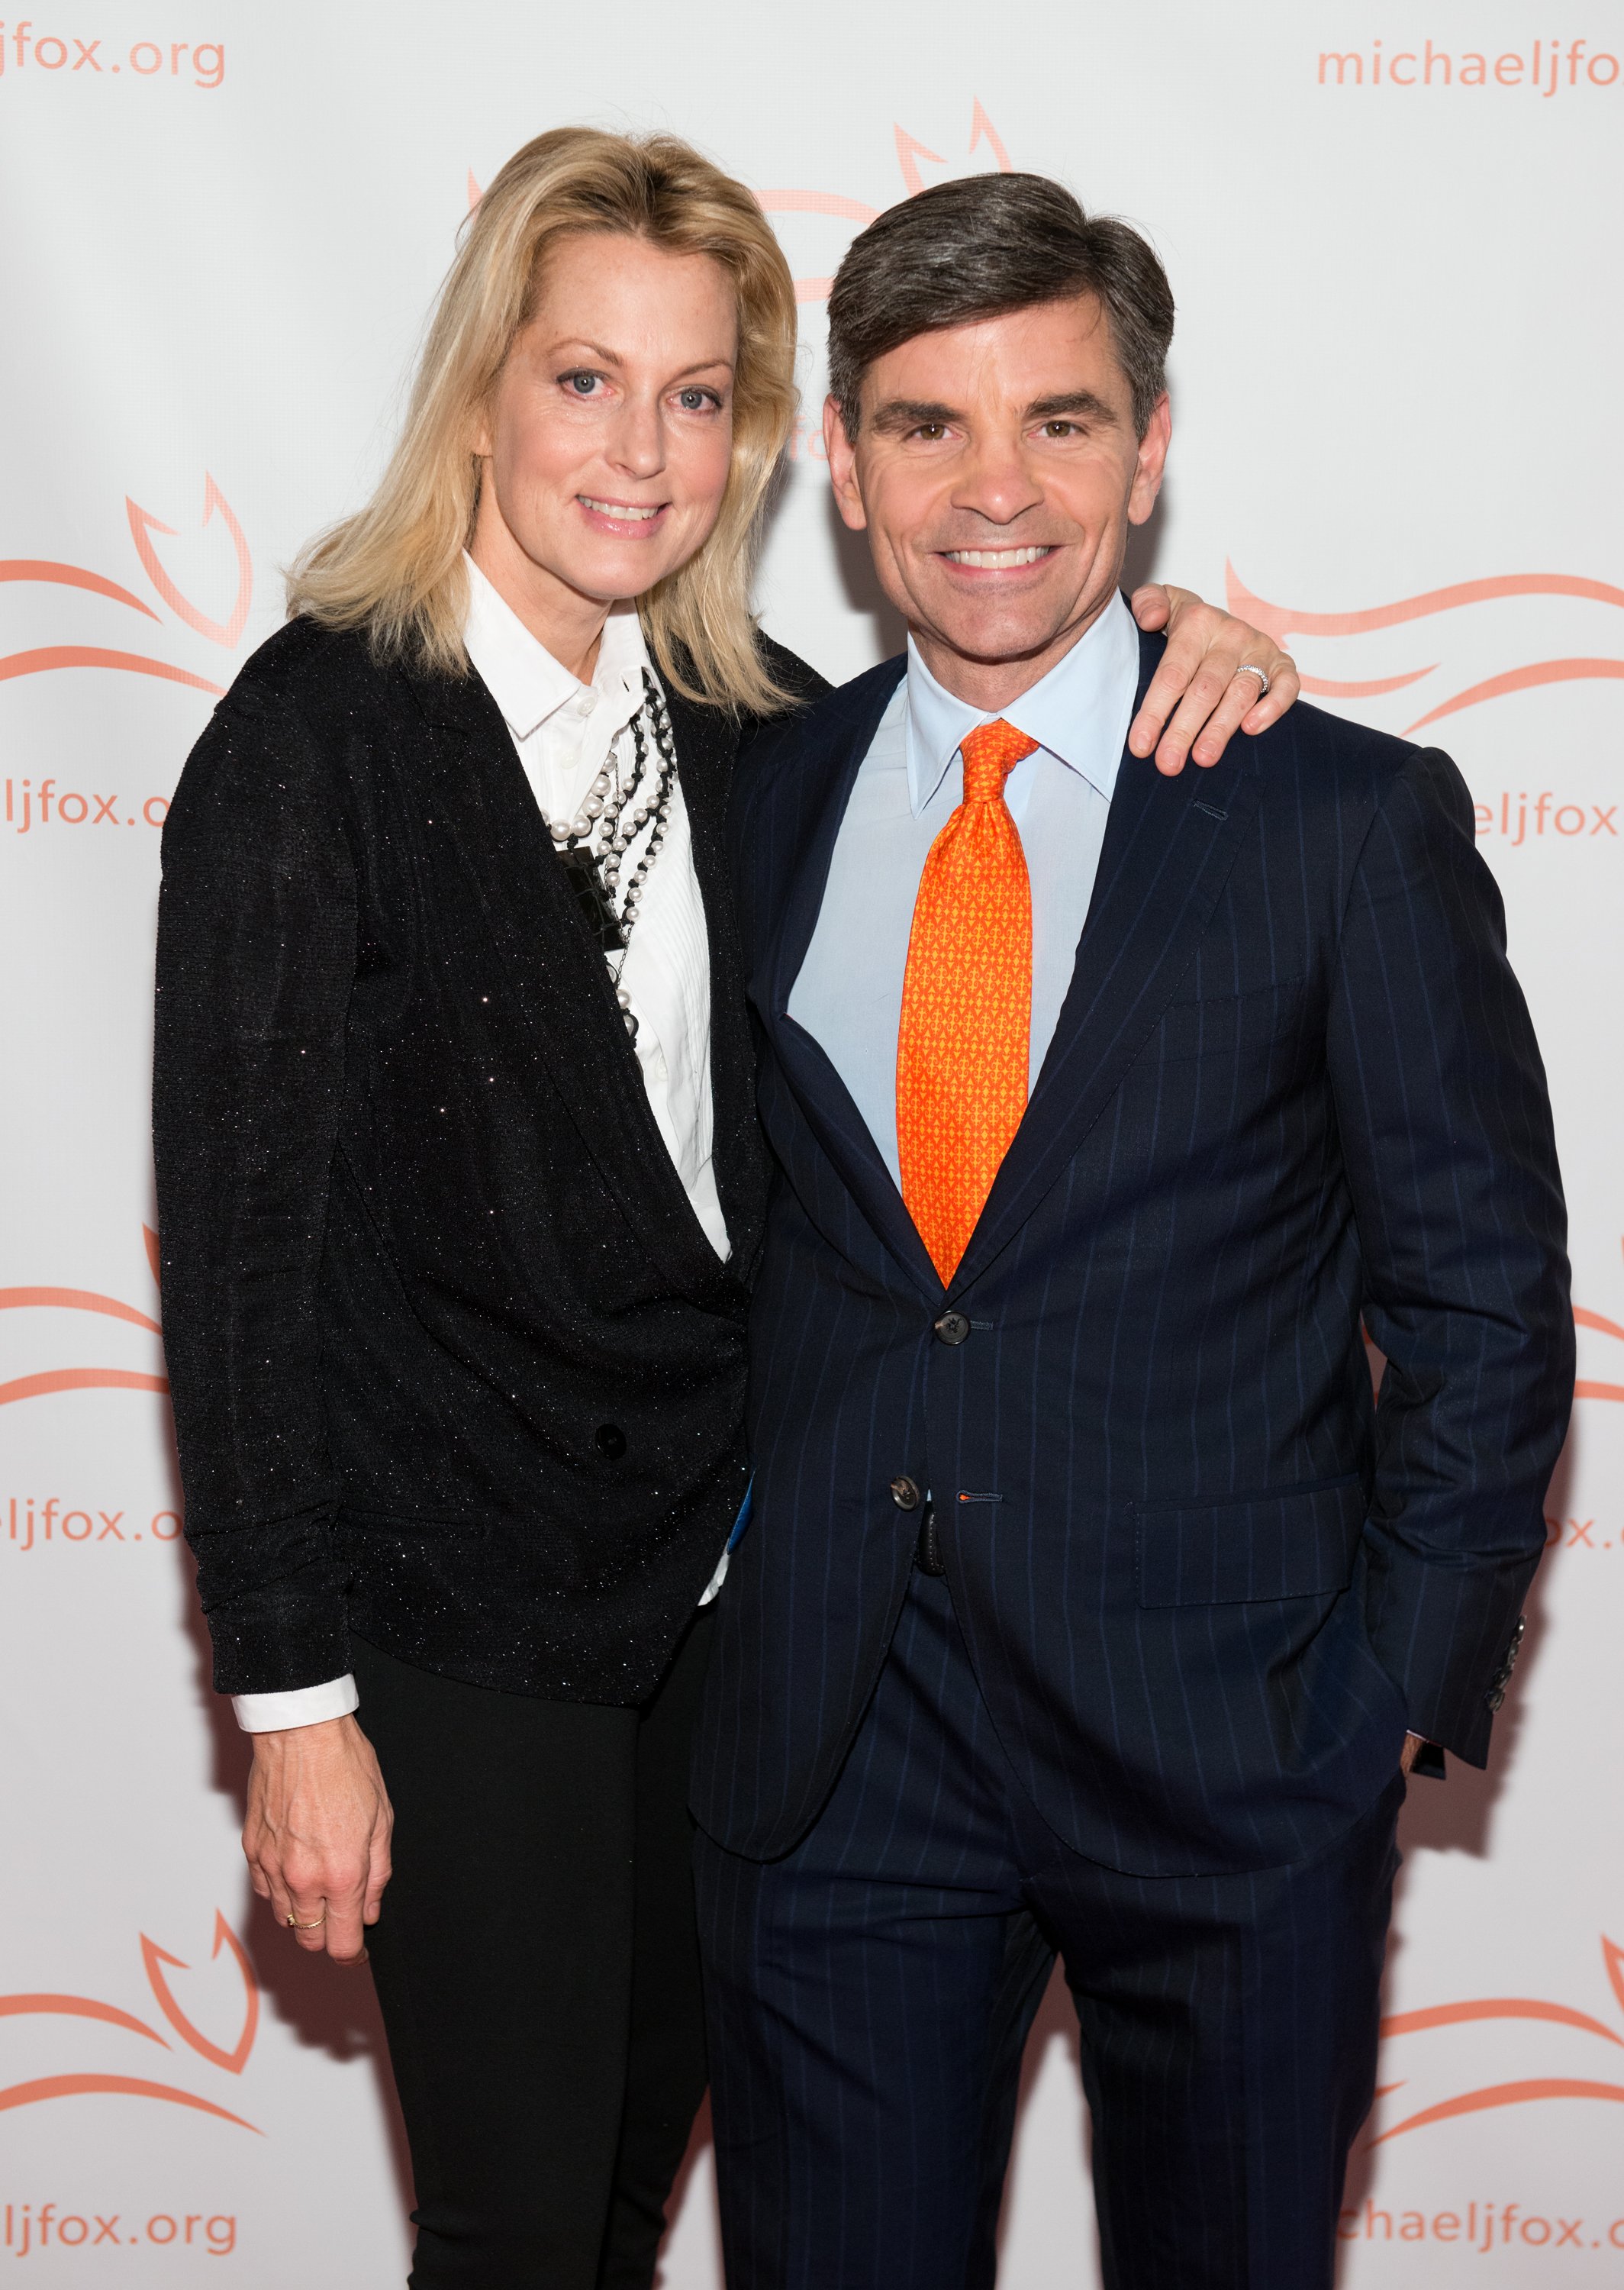 Ali Wentworth and George Stephanopoulos attend the Michael J. Fox Foundation's "A Funny Thing Happened On The Way To Cure Parkinson's" Gala on November 14, 2015. | Source: Getty Images